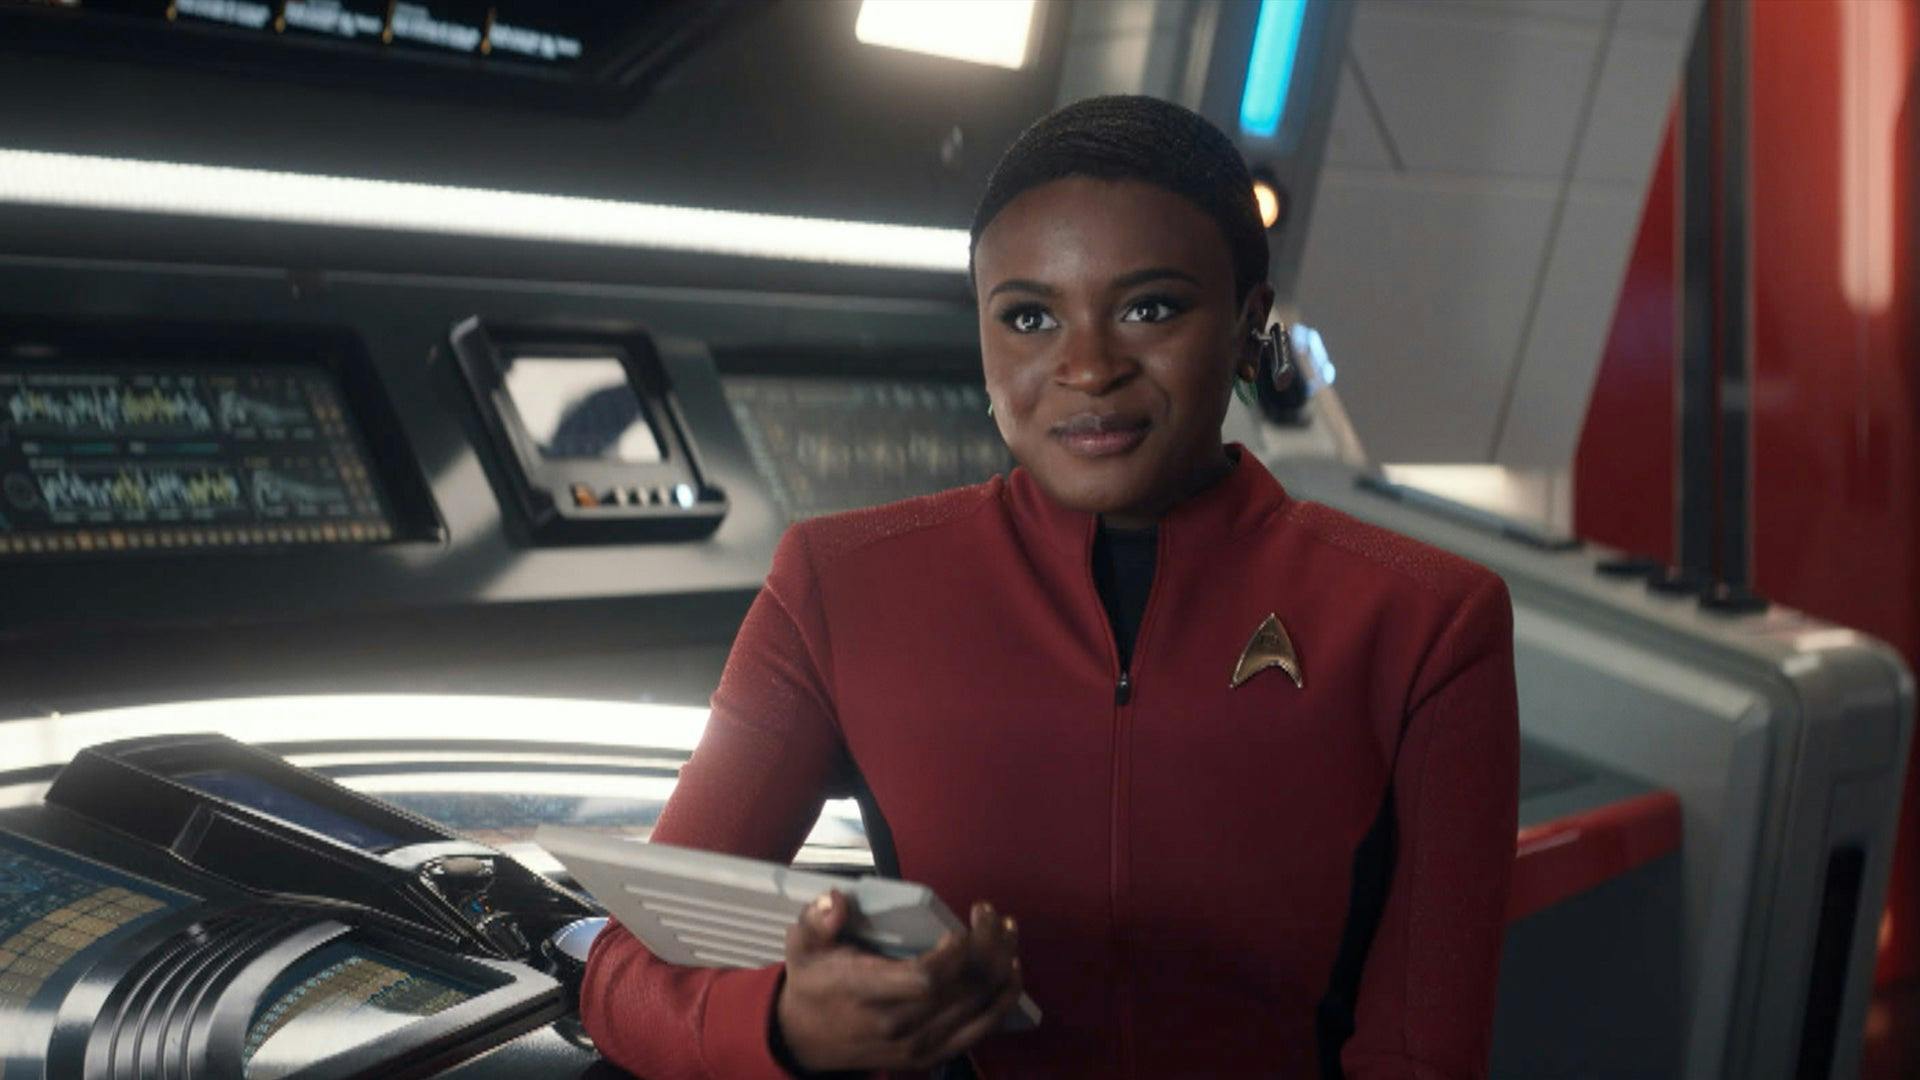 Ensign Uhura looks ahead as she sits at the Comms station on the Enterprise